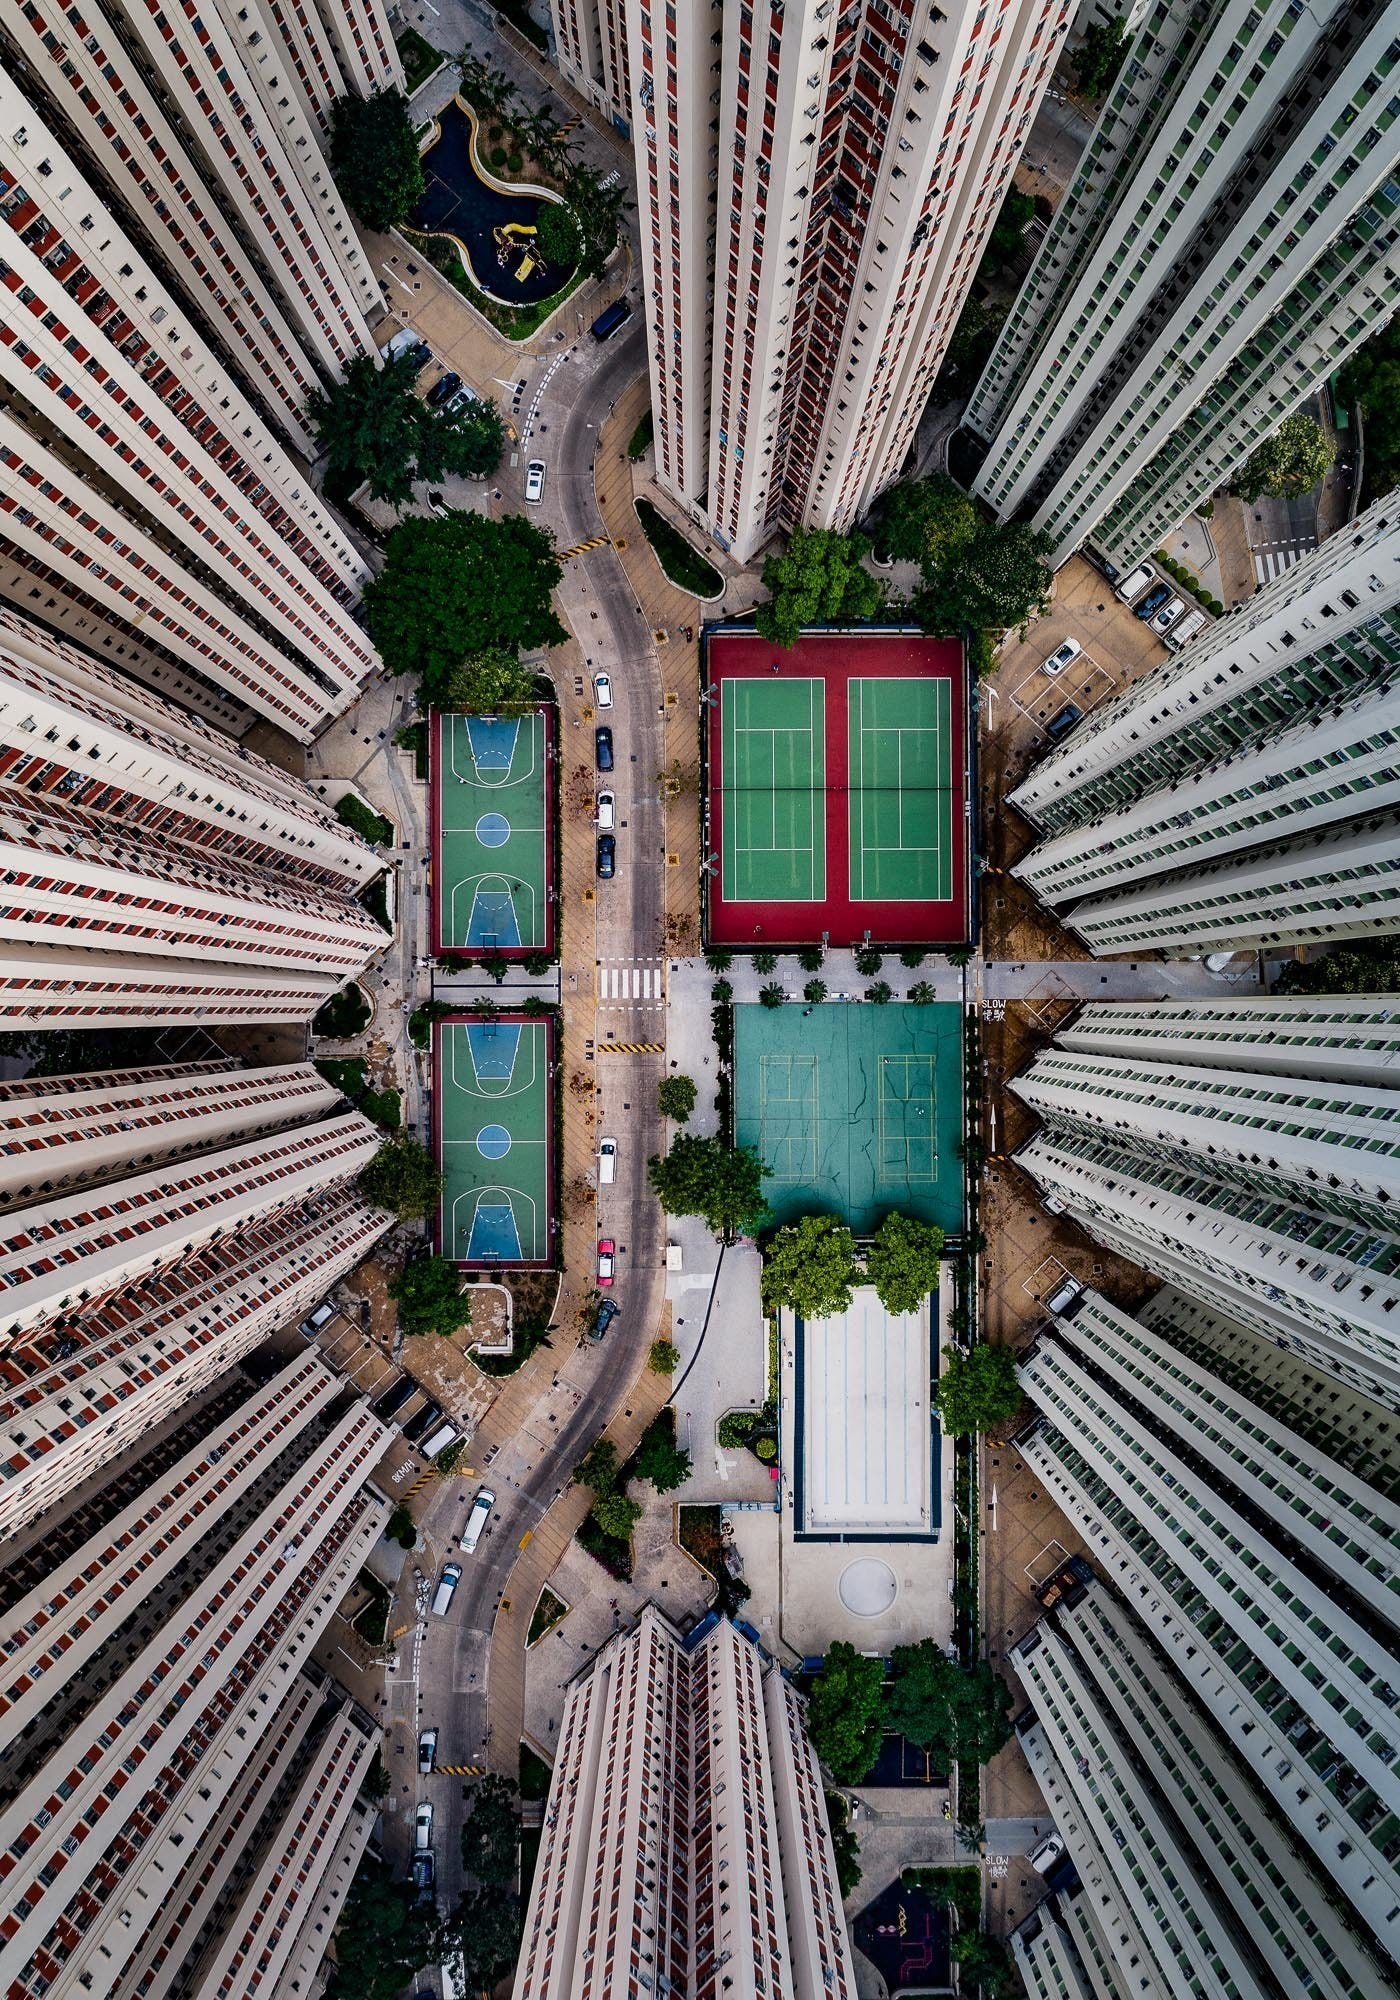 Tennis courts within buildings in Hong Kong